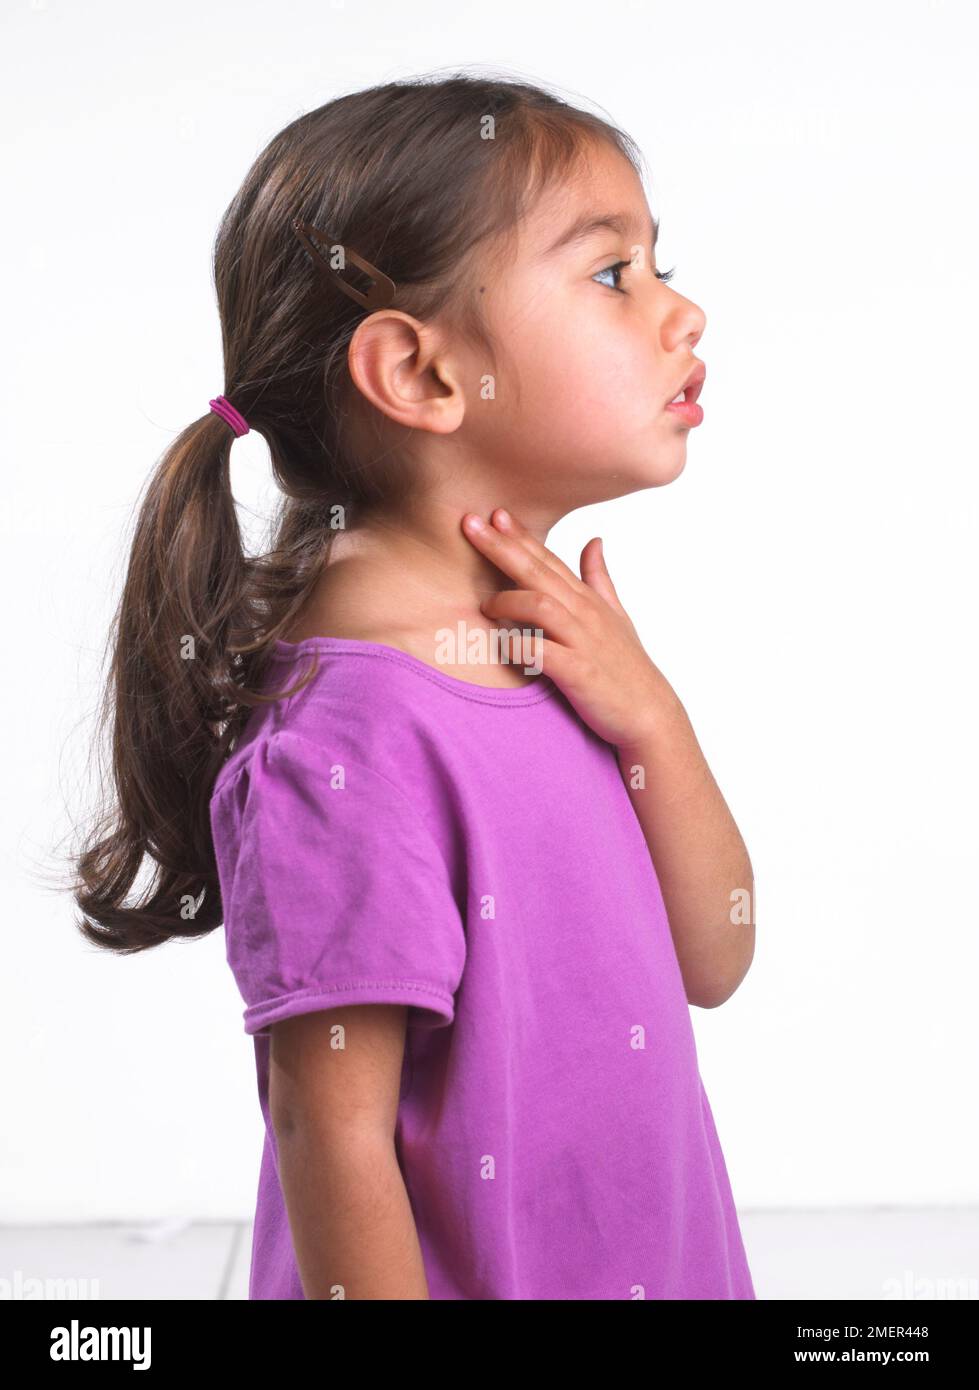 Girl wearing pink top touching her throat, side view, 3.5 years Stock Photo